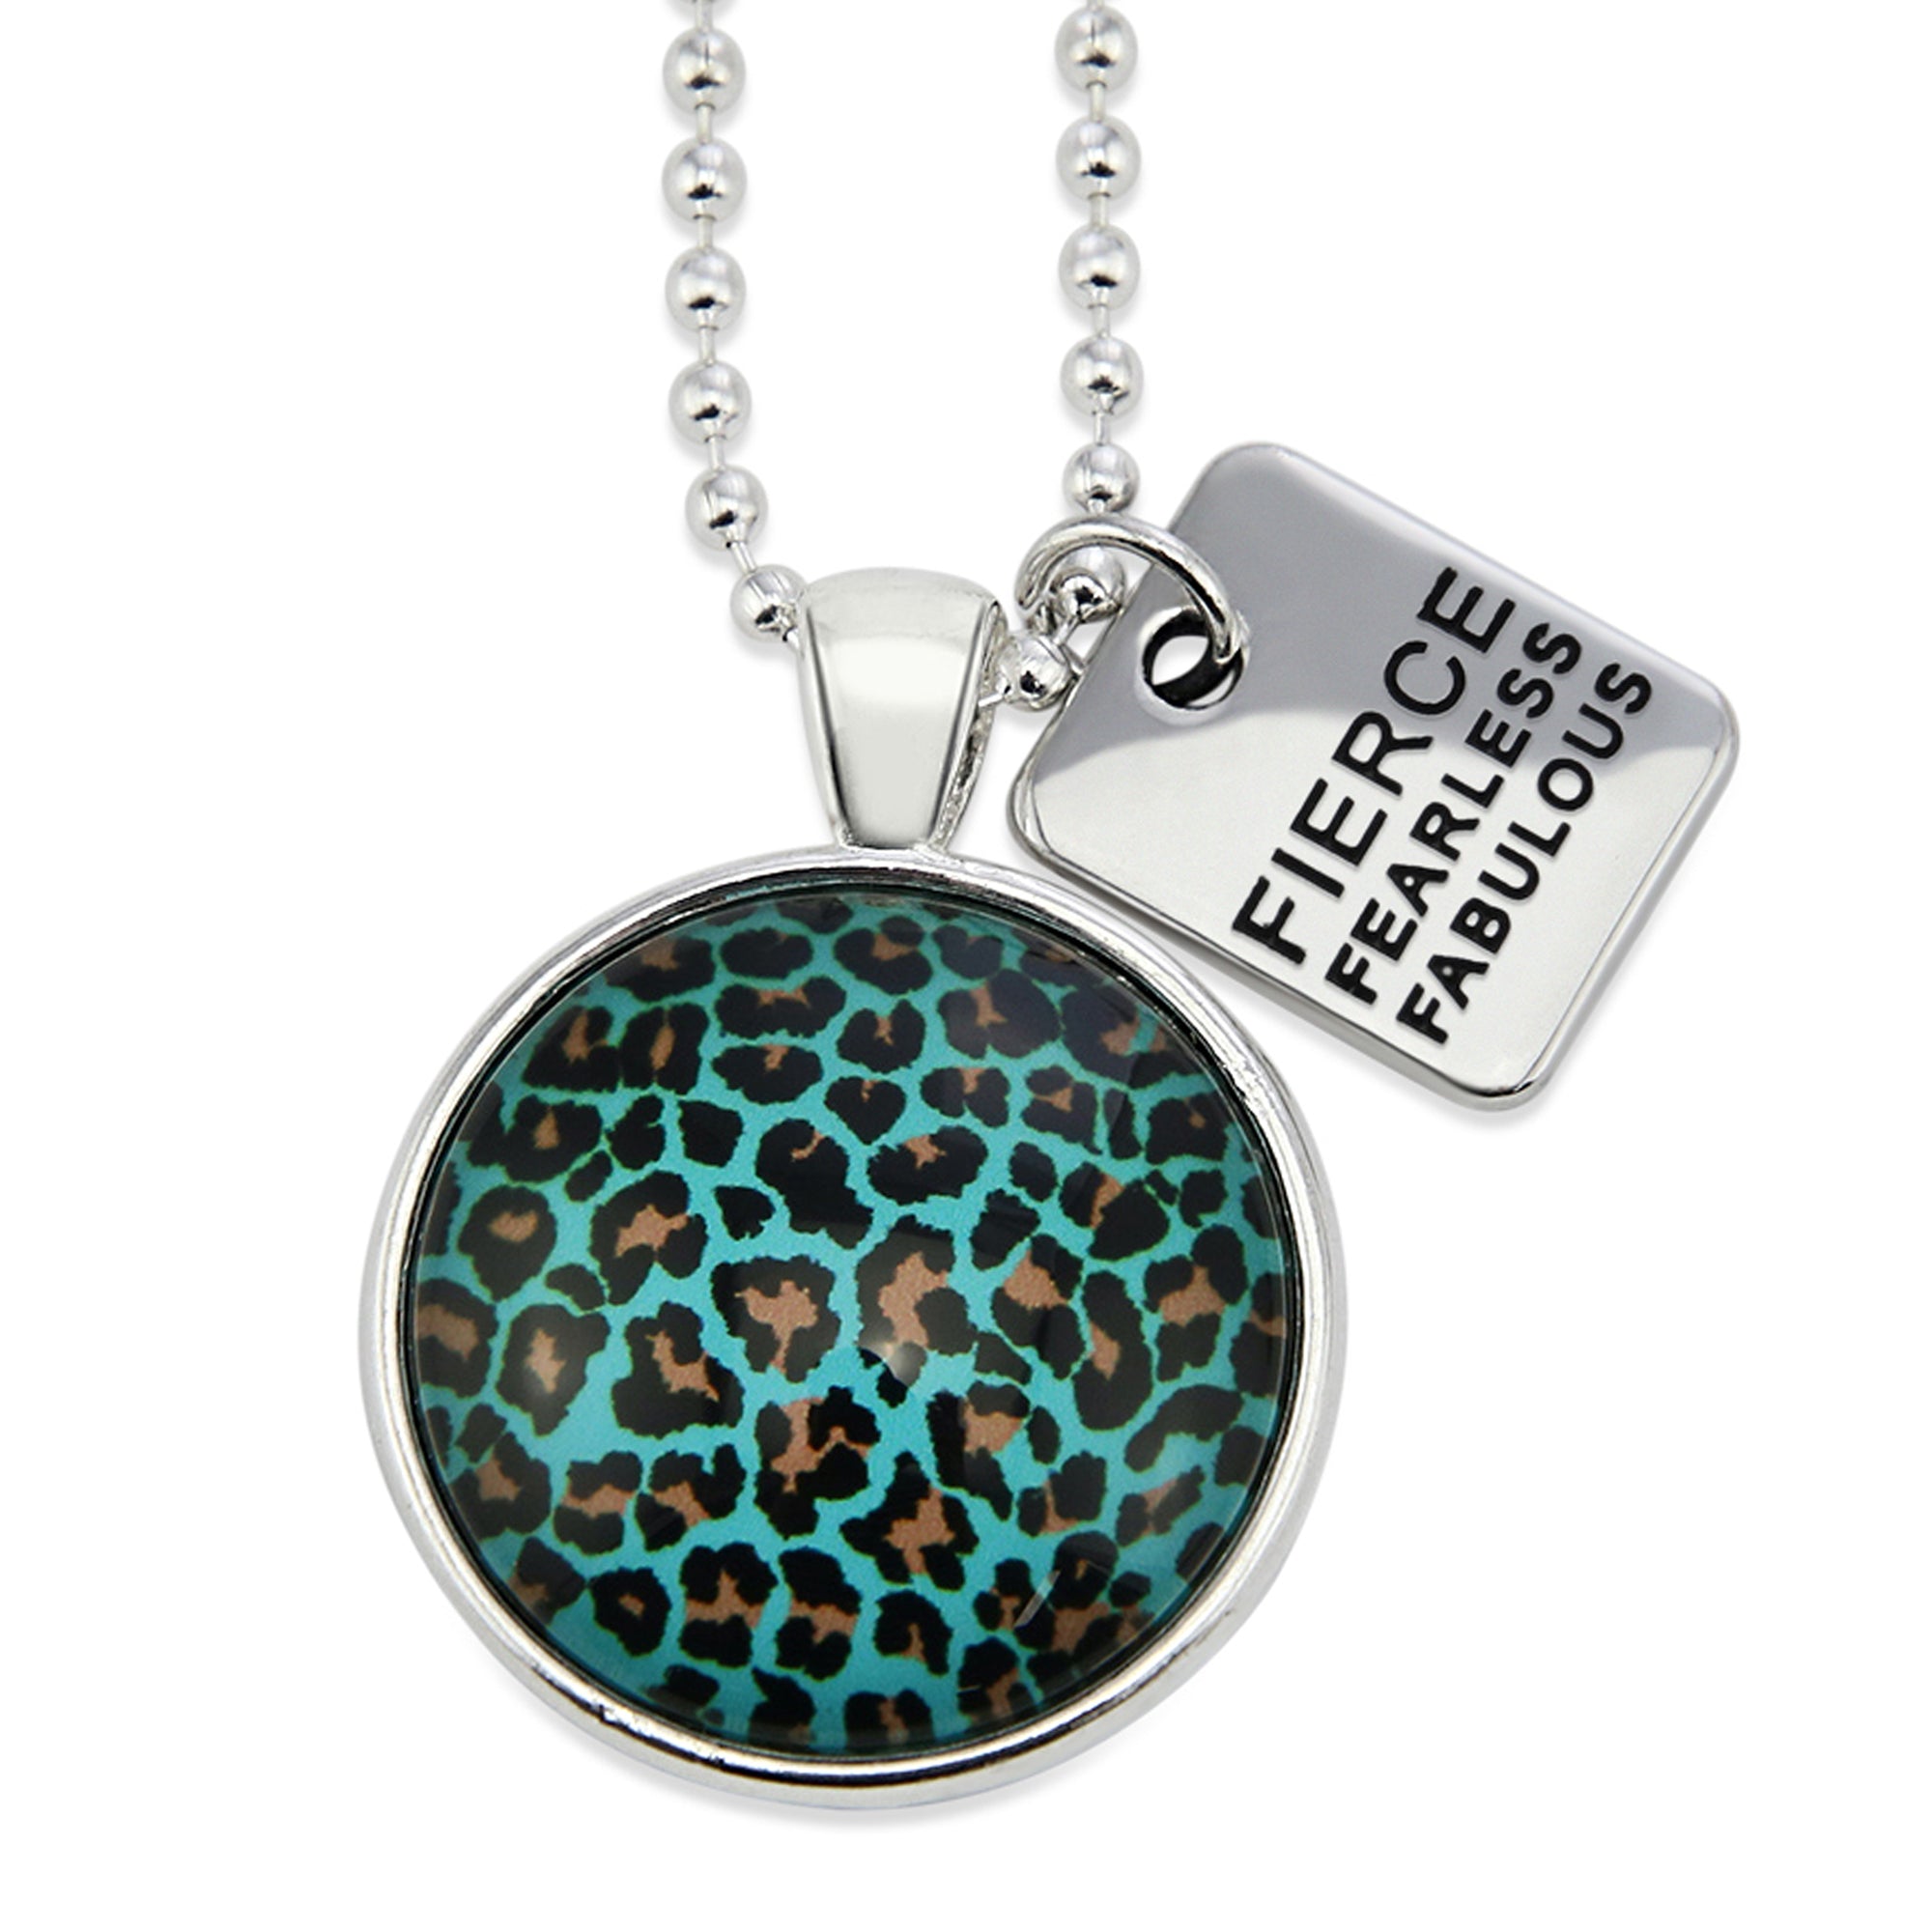 Teal leopard print pendant necklace in bright silver with fierce fearless fabulous charm. 